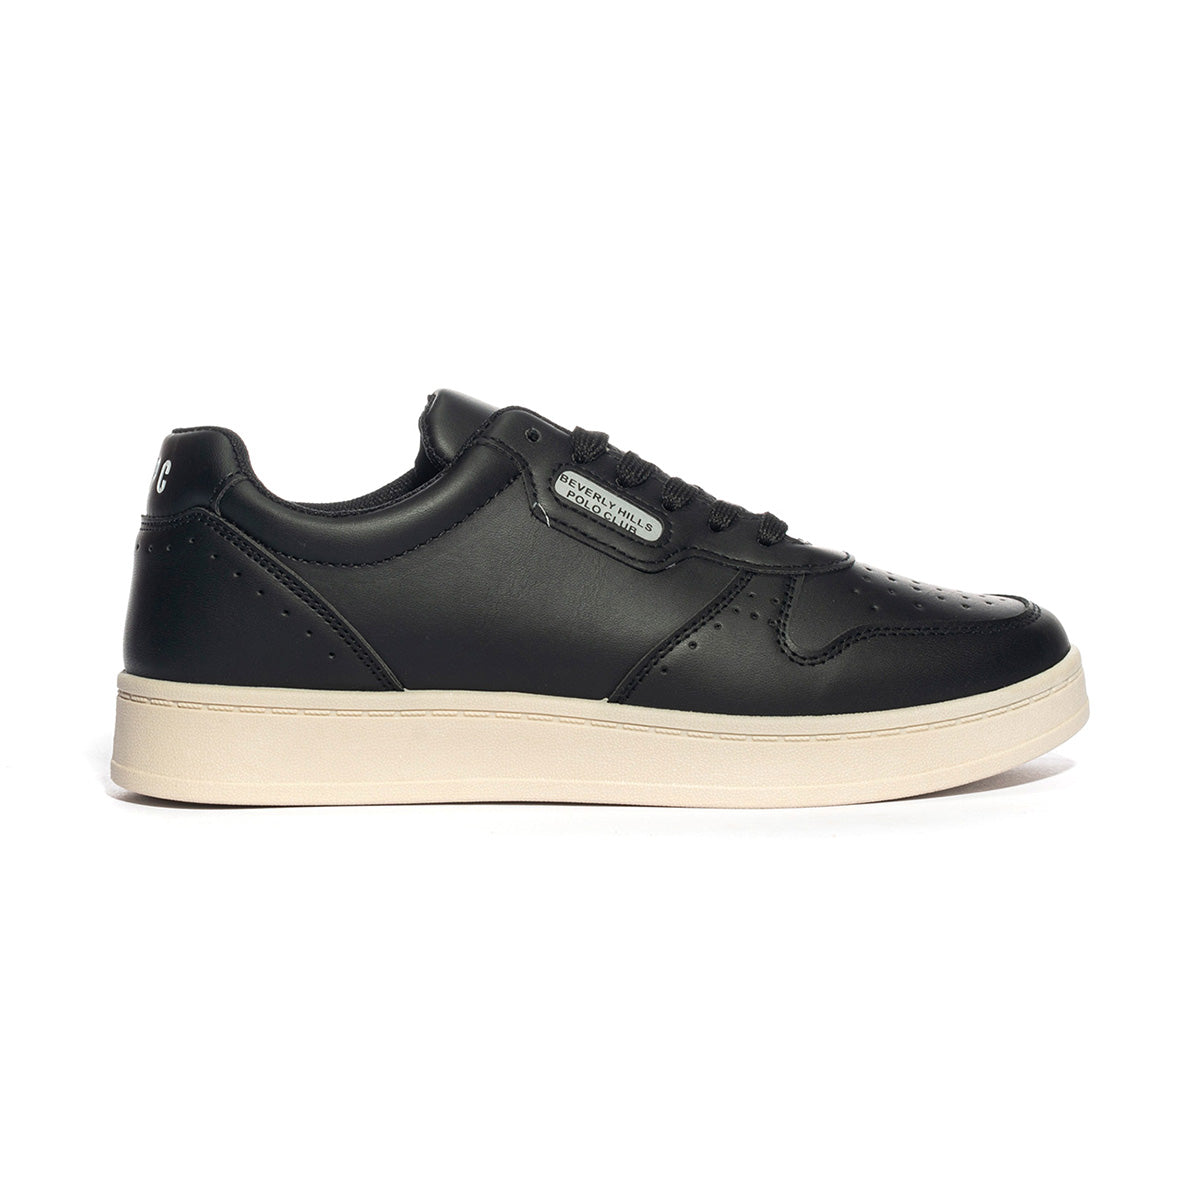 Sneakers Beverly hills Polo Club Hm8631 Nere